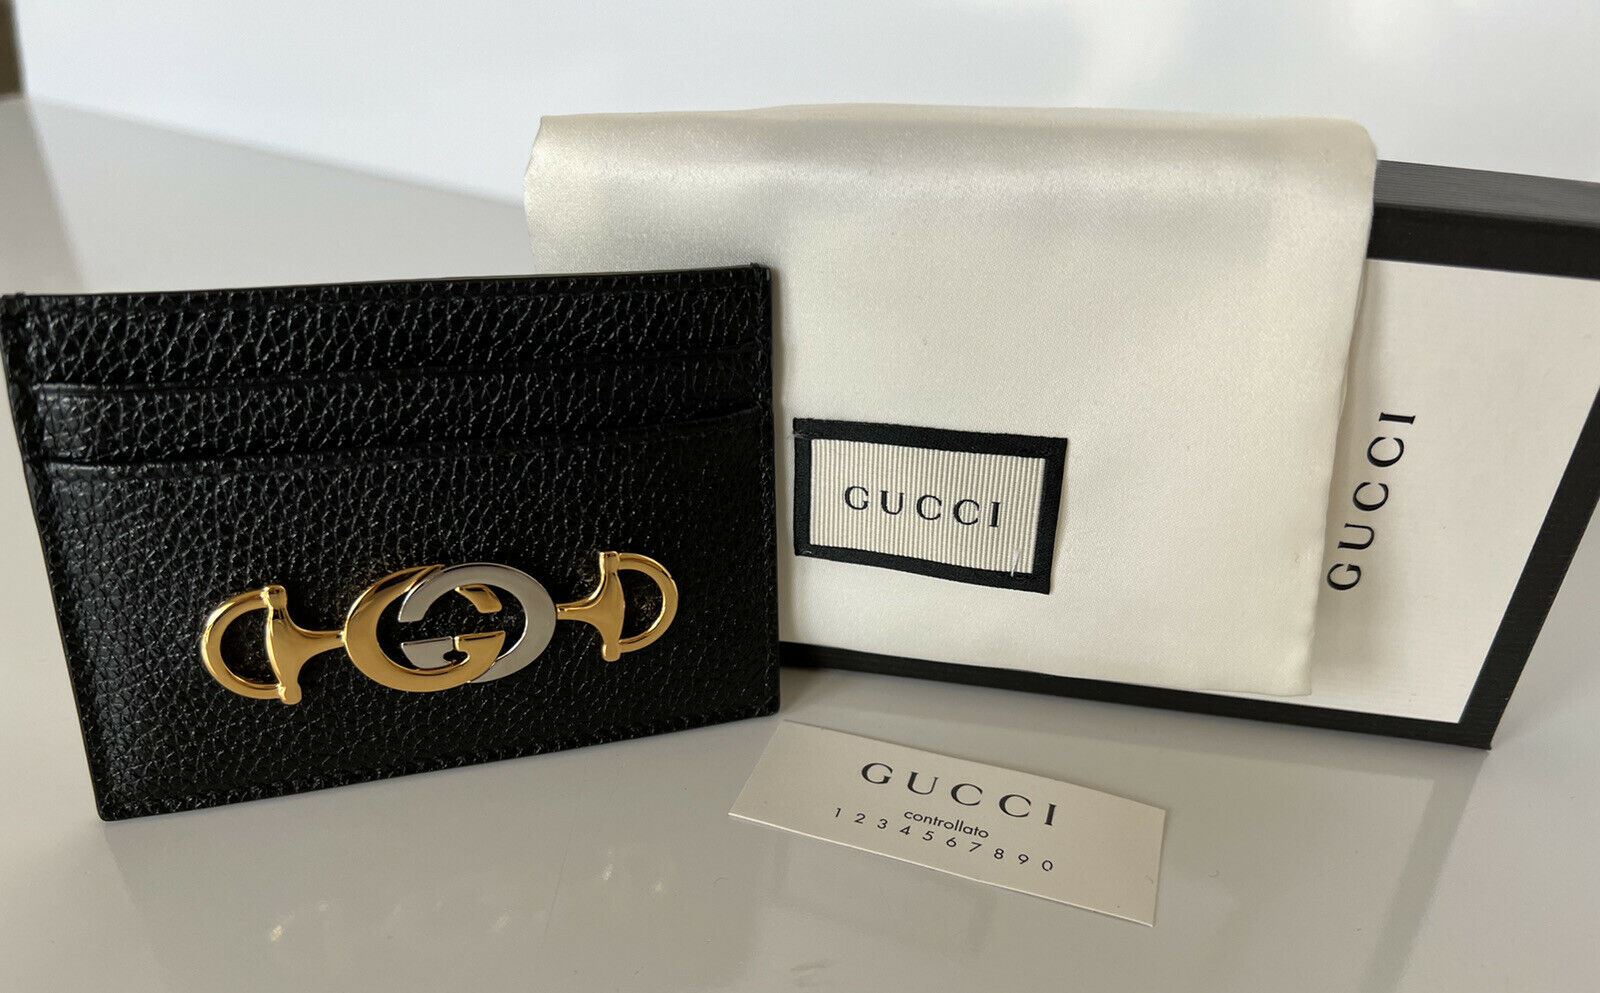 NWT Gucci Horsebit Zumi Peddled Black Leather Card Case Made in Italy 570679